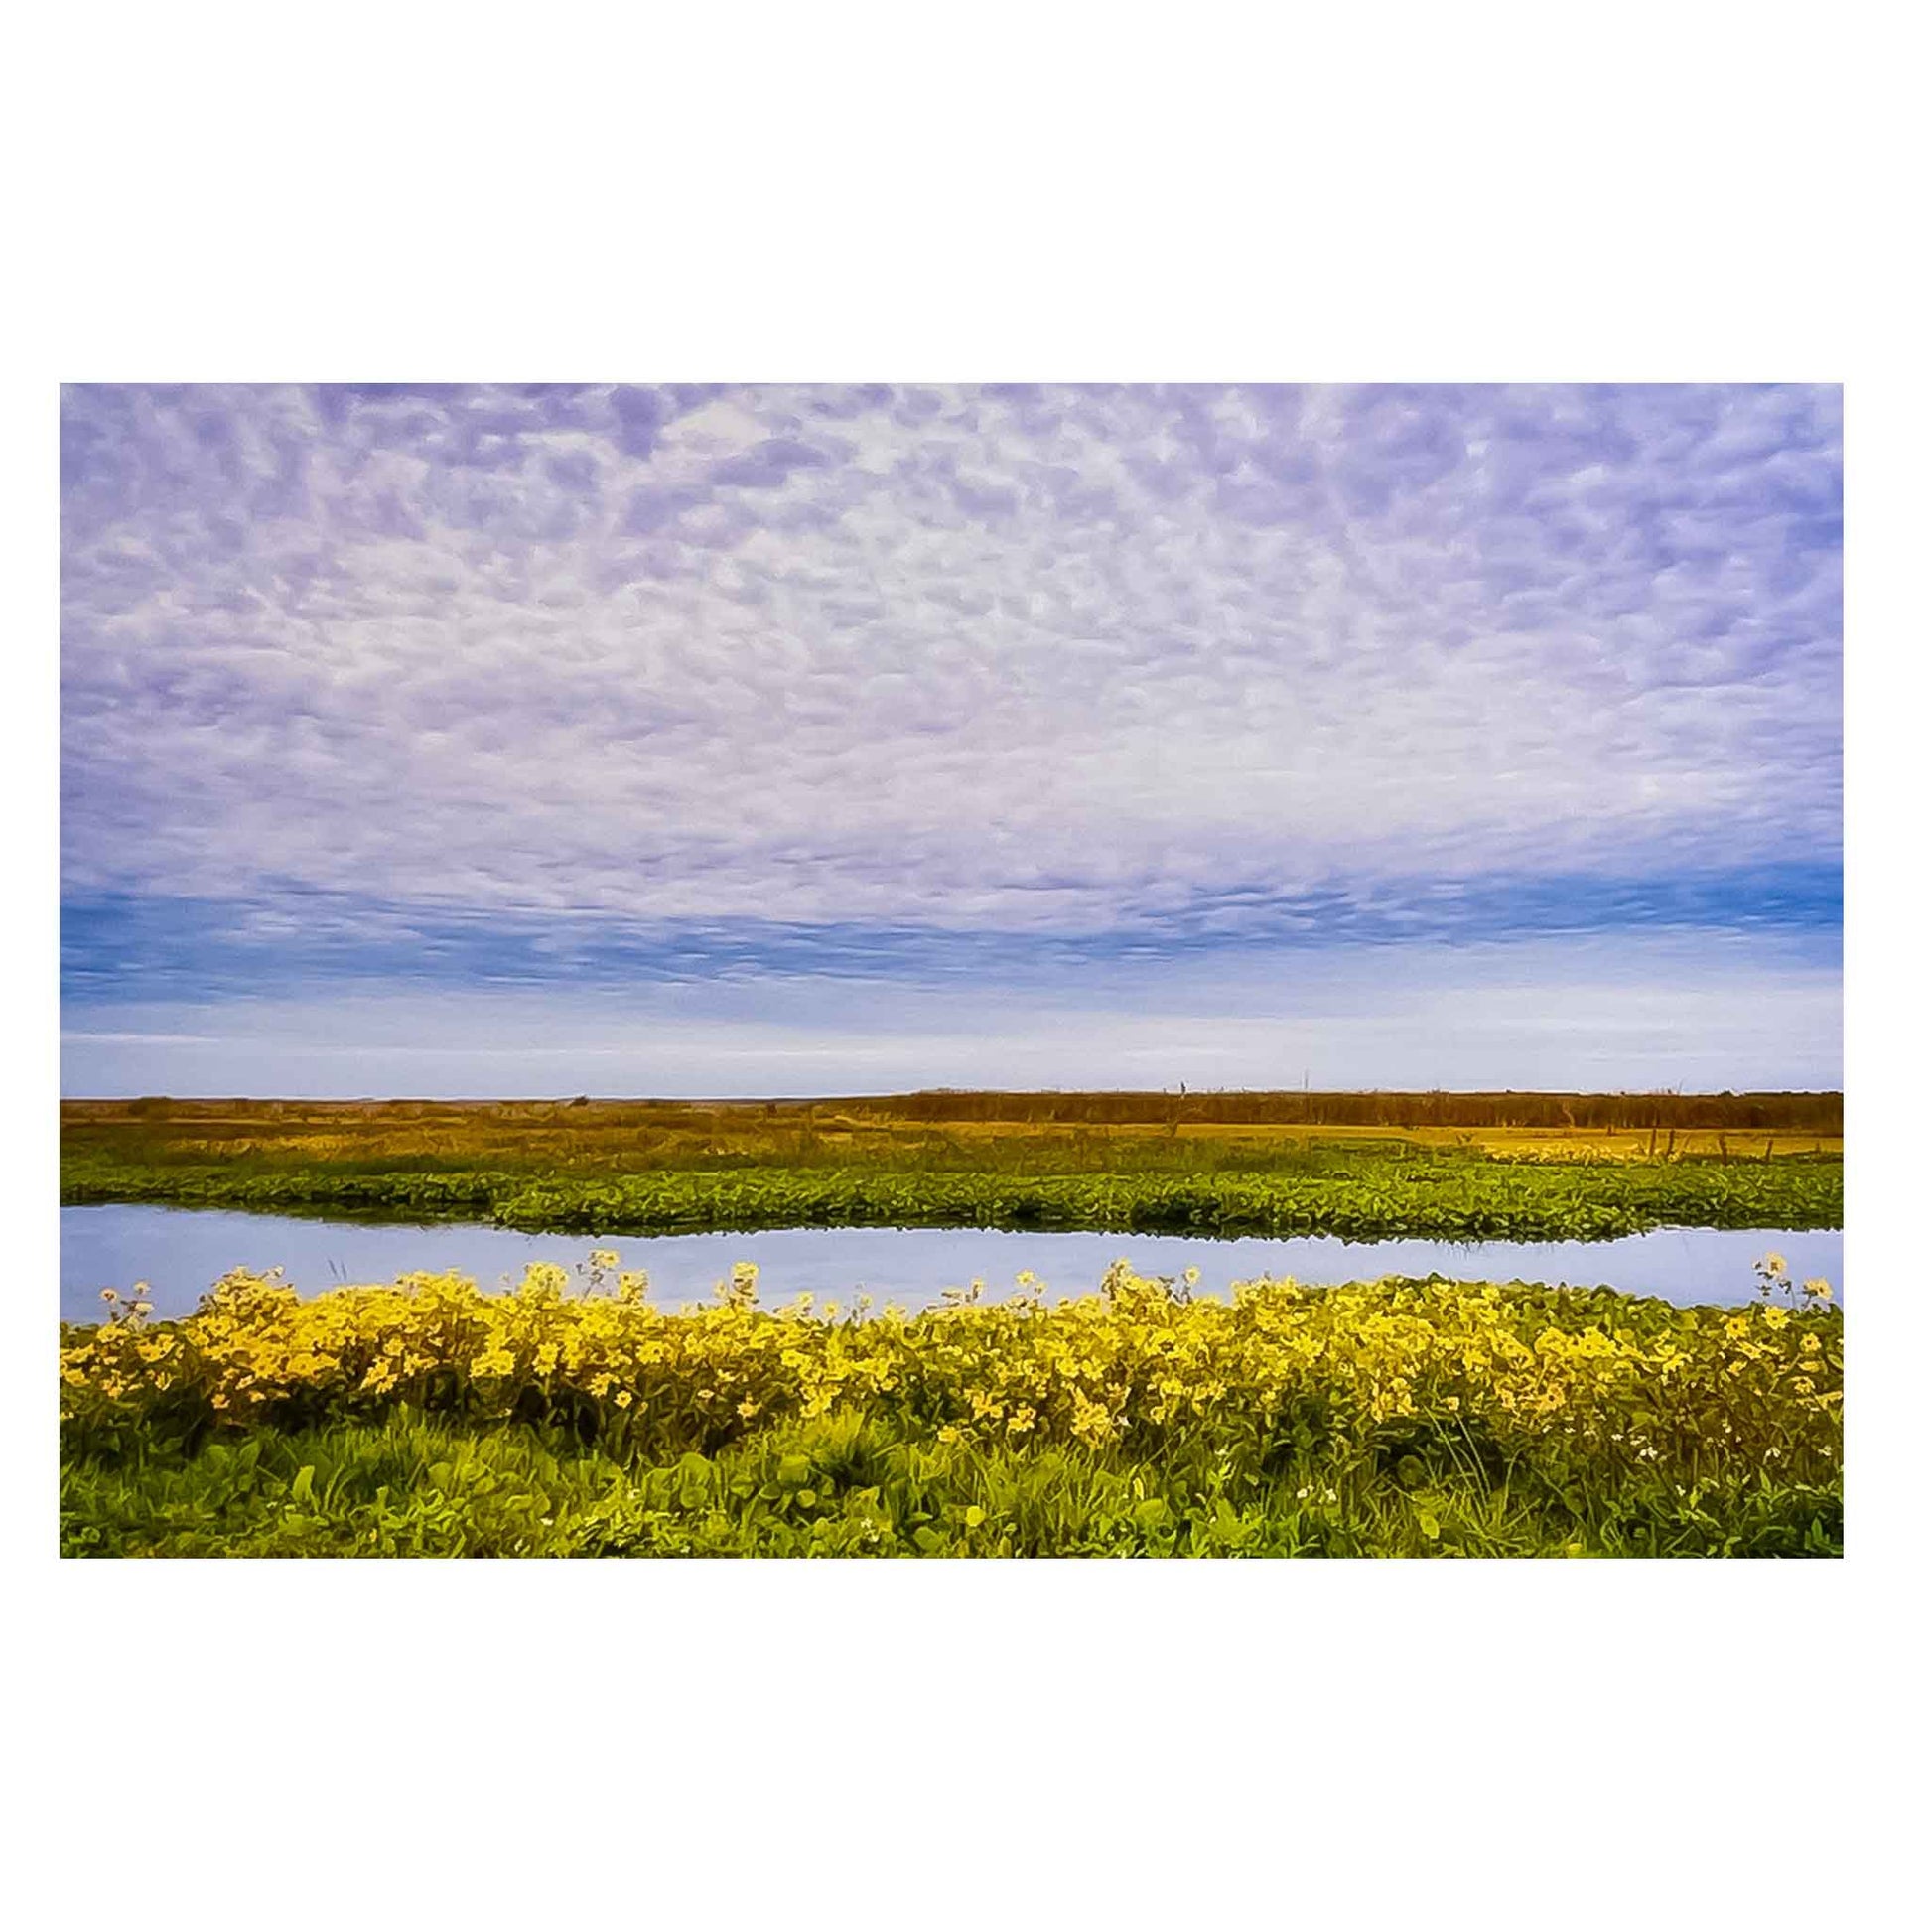 ECC "Yellow Flowers at Sunset" Matted Print is a print of an original photograph by photographer Claire Closson.  A tranquil view of yellow flowers in a marsh with a clear stream running through the middle.  Beautiful wispy white clouds in a violet sky.  16 x 20 inches matted print on a foam board back.  Ready to frame.